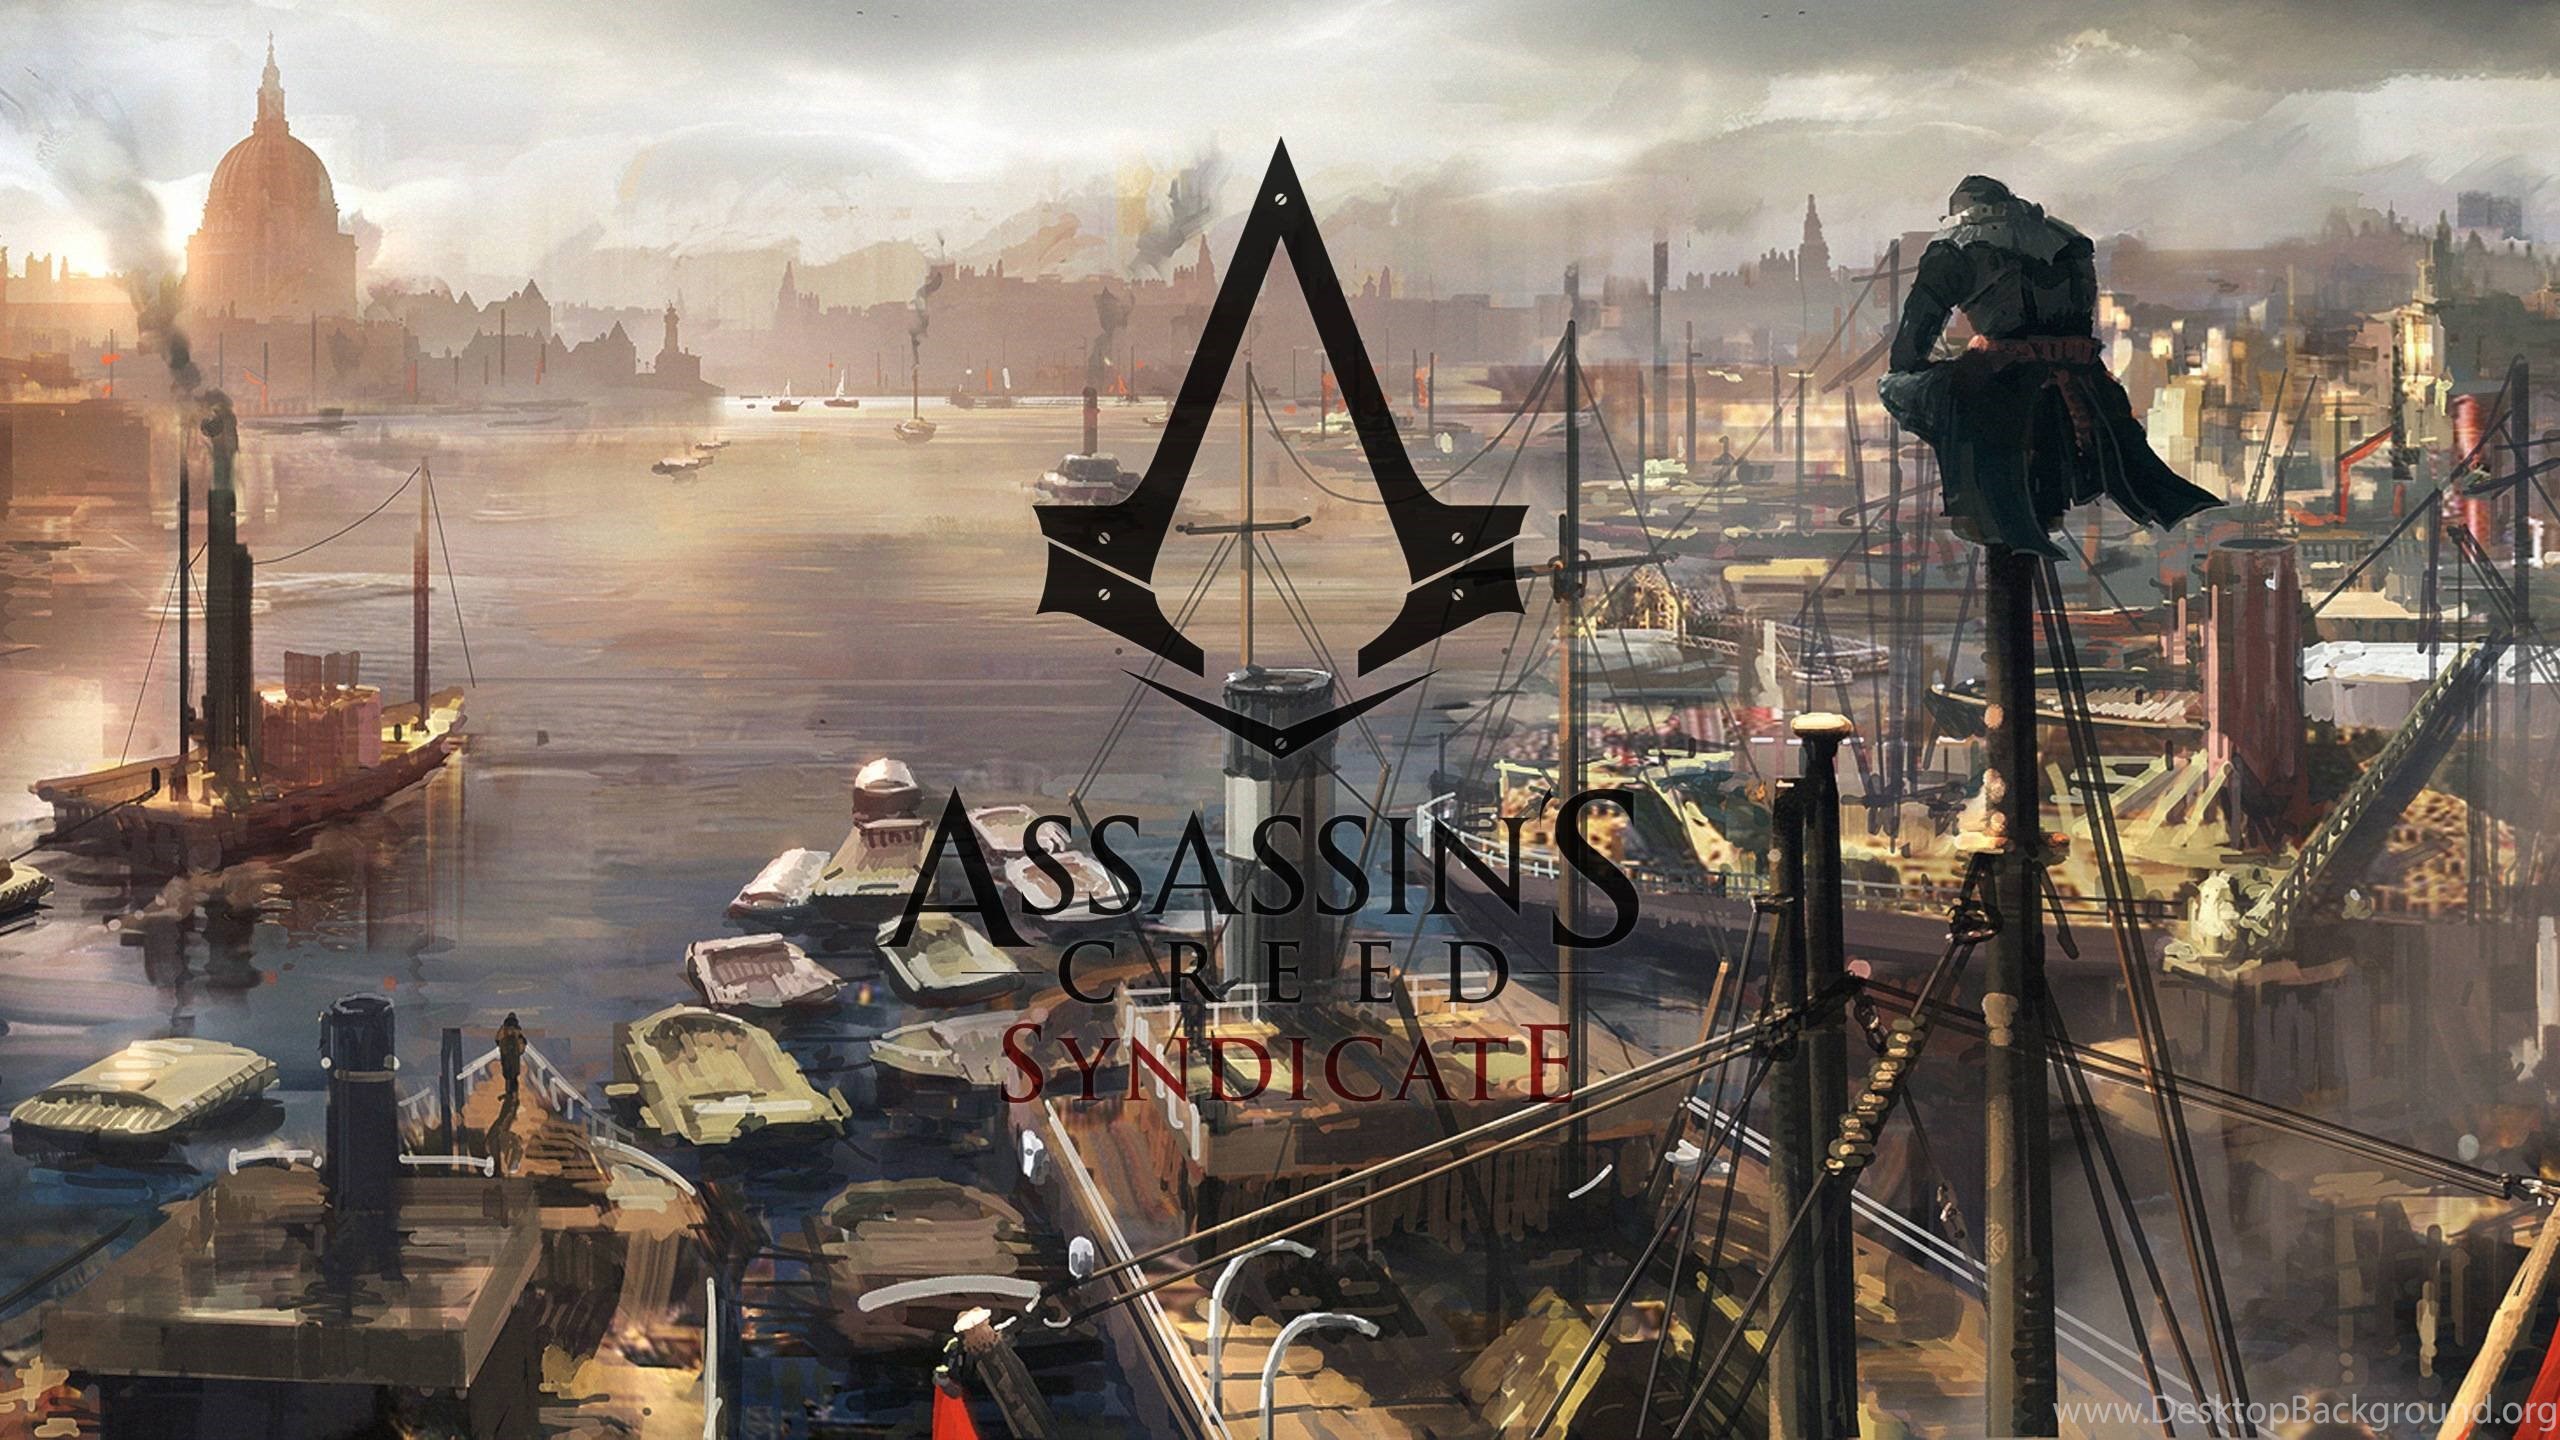 Download Assassins Creed Syndicate Logo Cool Wallpapers Hd 1080p